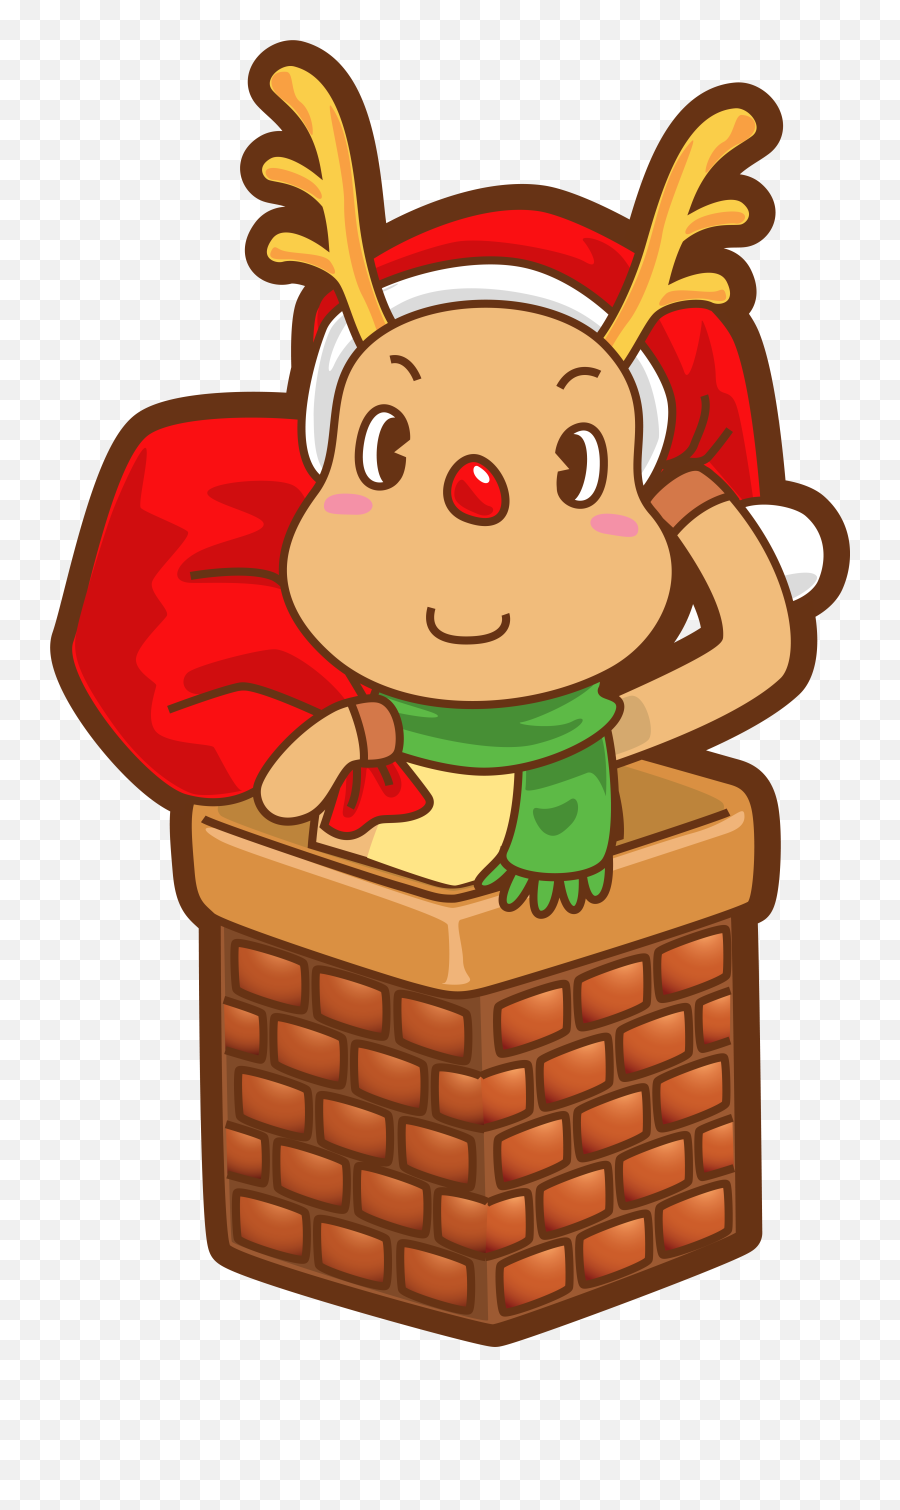 Christmas In Chimney Png Clip Art Image - Rudolph Entering The Chimney,Chimney Png